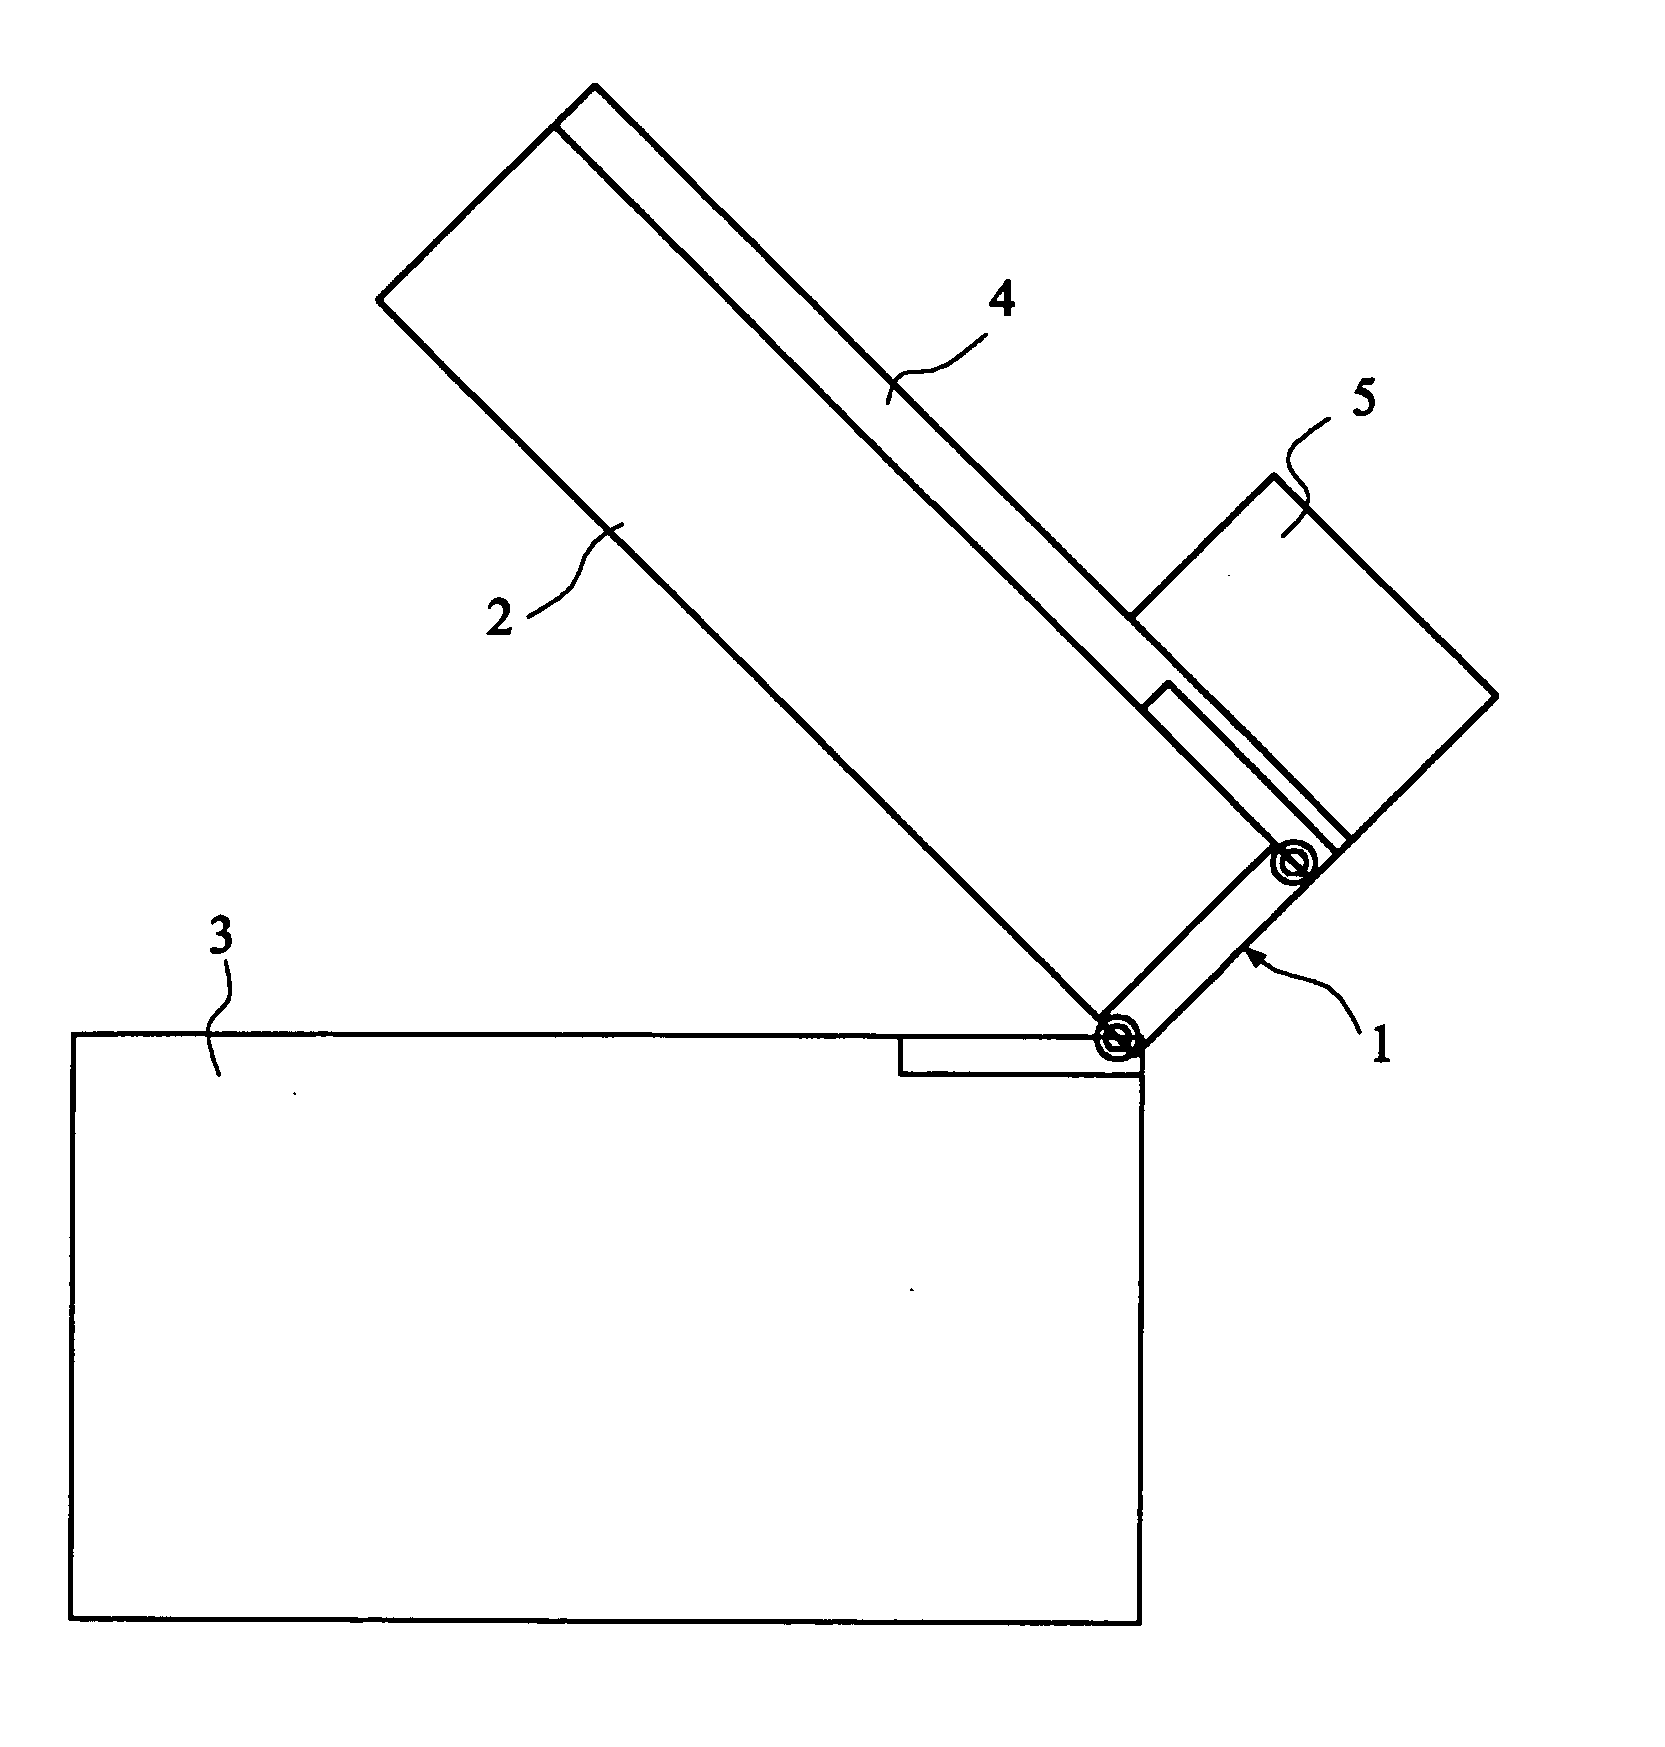 Duplex hinge device and a multi-function peripheral using the same